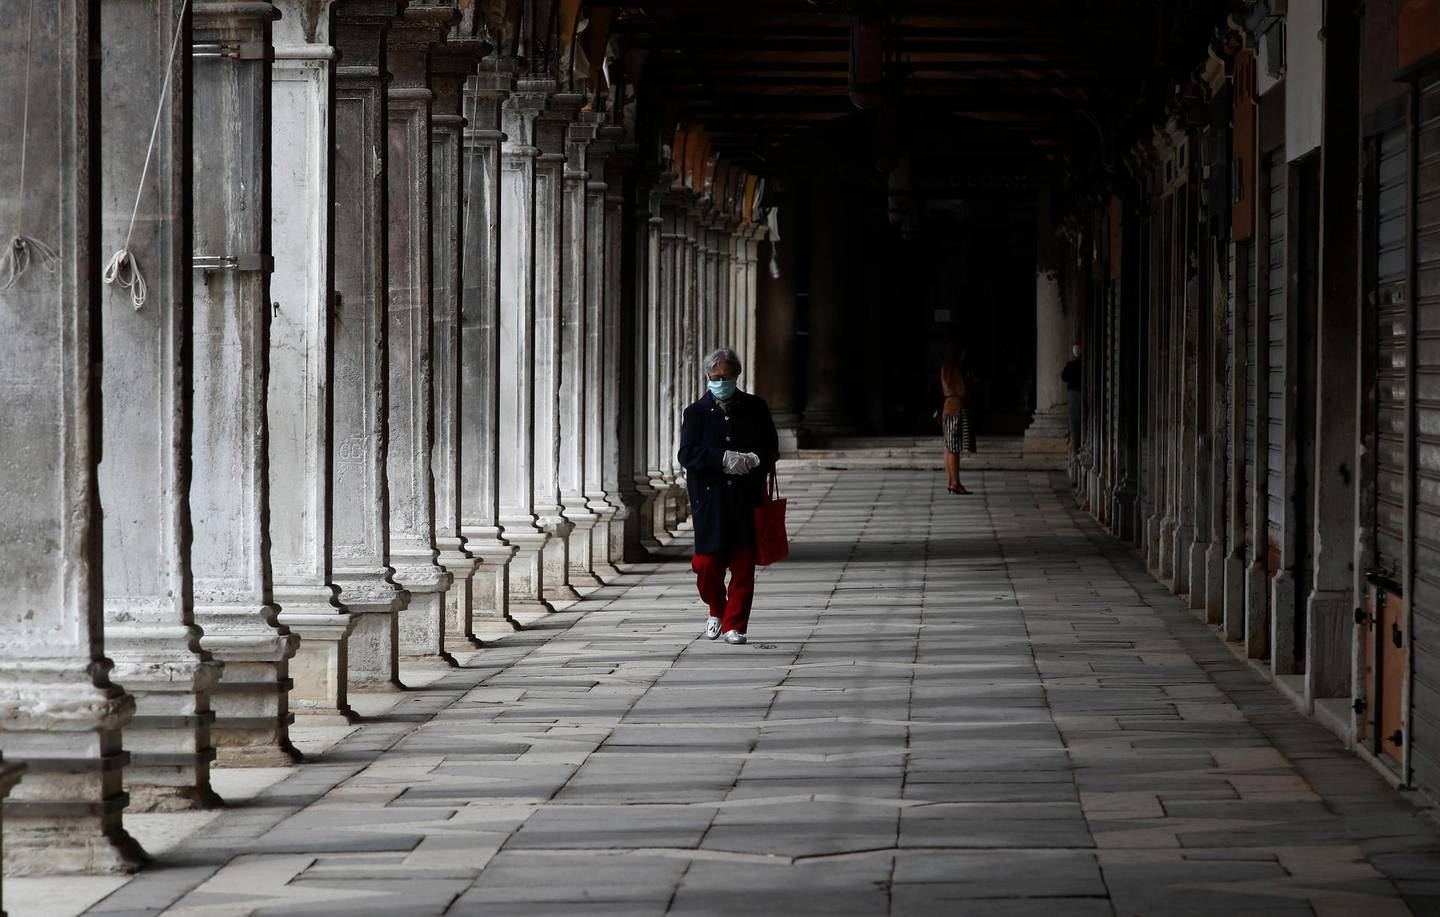 In this picture taken on Wednesday, May 13, 2020, a woman wearing a sanitary mask walks at St. Mark's Square in Venice, Italy. Venetians are rethinking their city in the quiet brought by the coronavirus pandemic. For years, the unbridled success of Venice's tourism industry threatened to ruin the things that made it an attractive destination to begin with. Now the pandemic has ground to a halt Italyâ€™s most-visited city, stopped the flow of 3 billion euros in annual tourism-related revenue and devastated the city's economy. (AP Photo/Antonio Calanni)